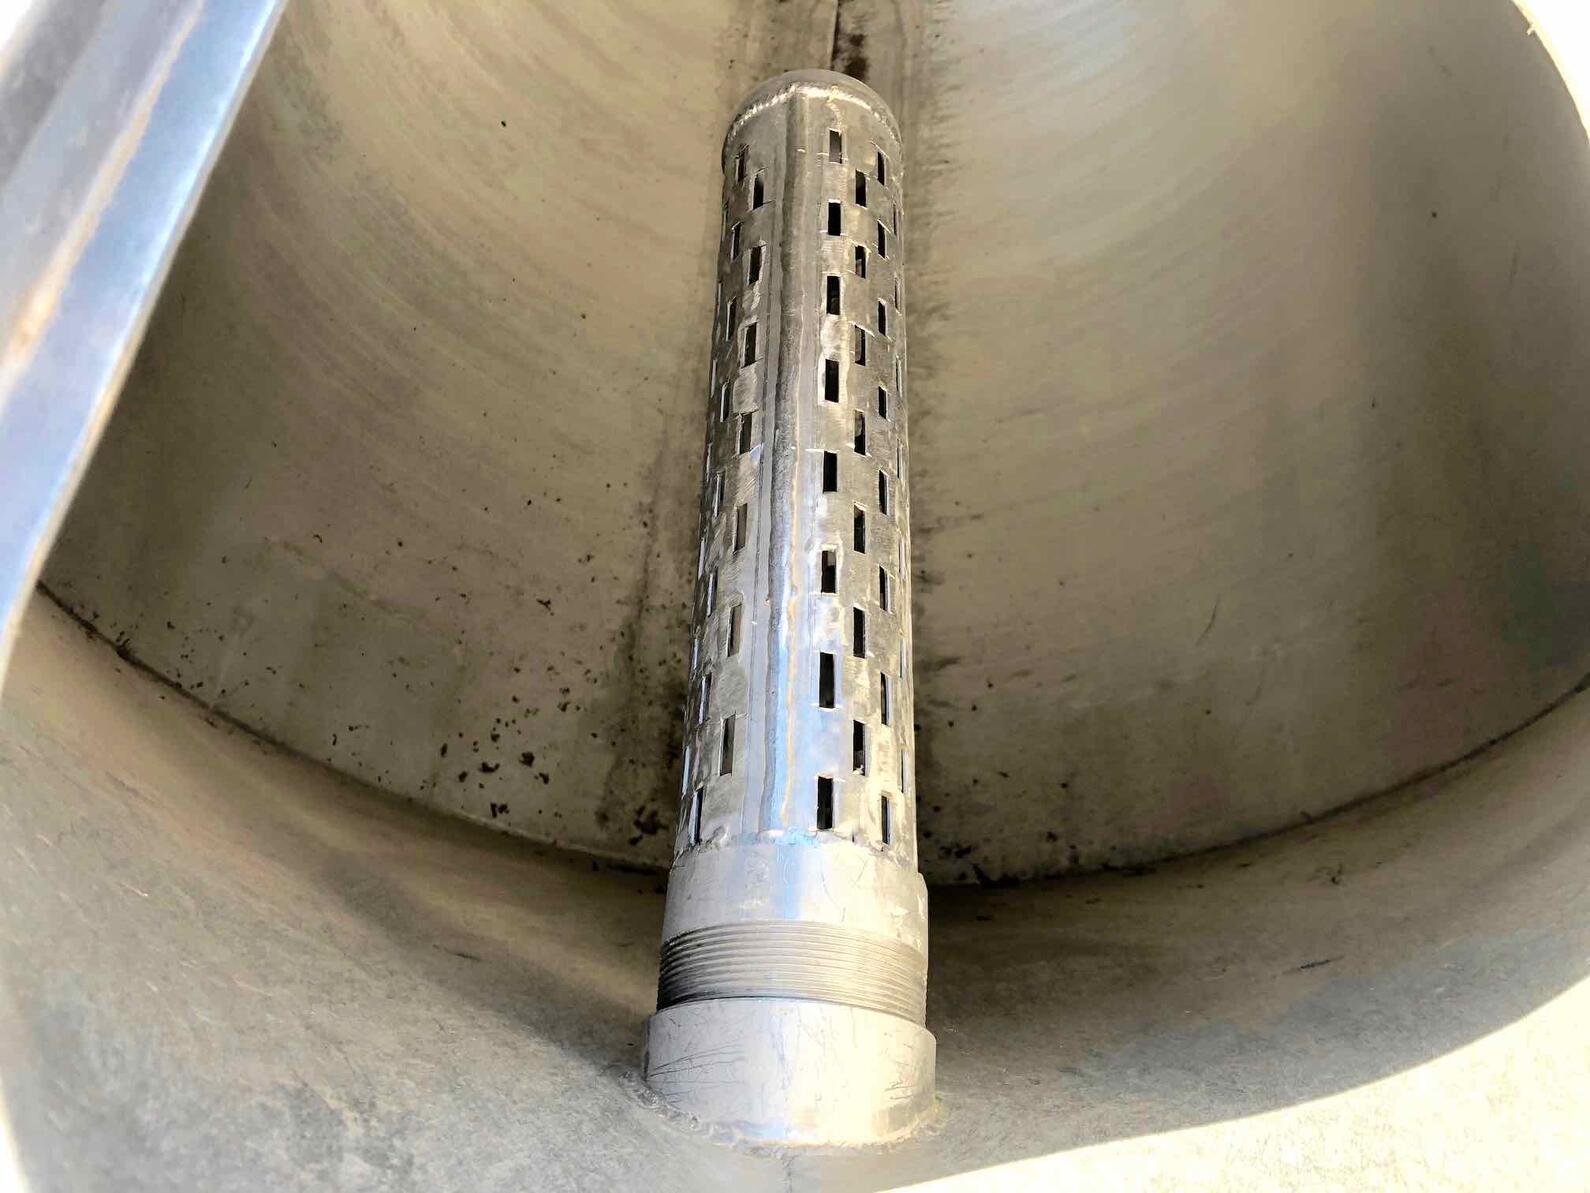 Stainless steel tank closed - On feet